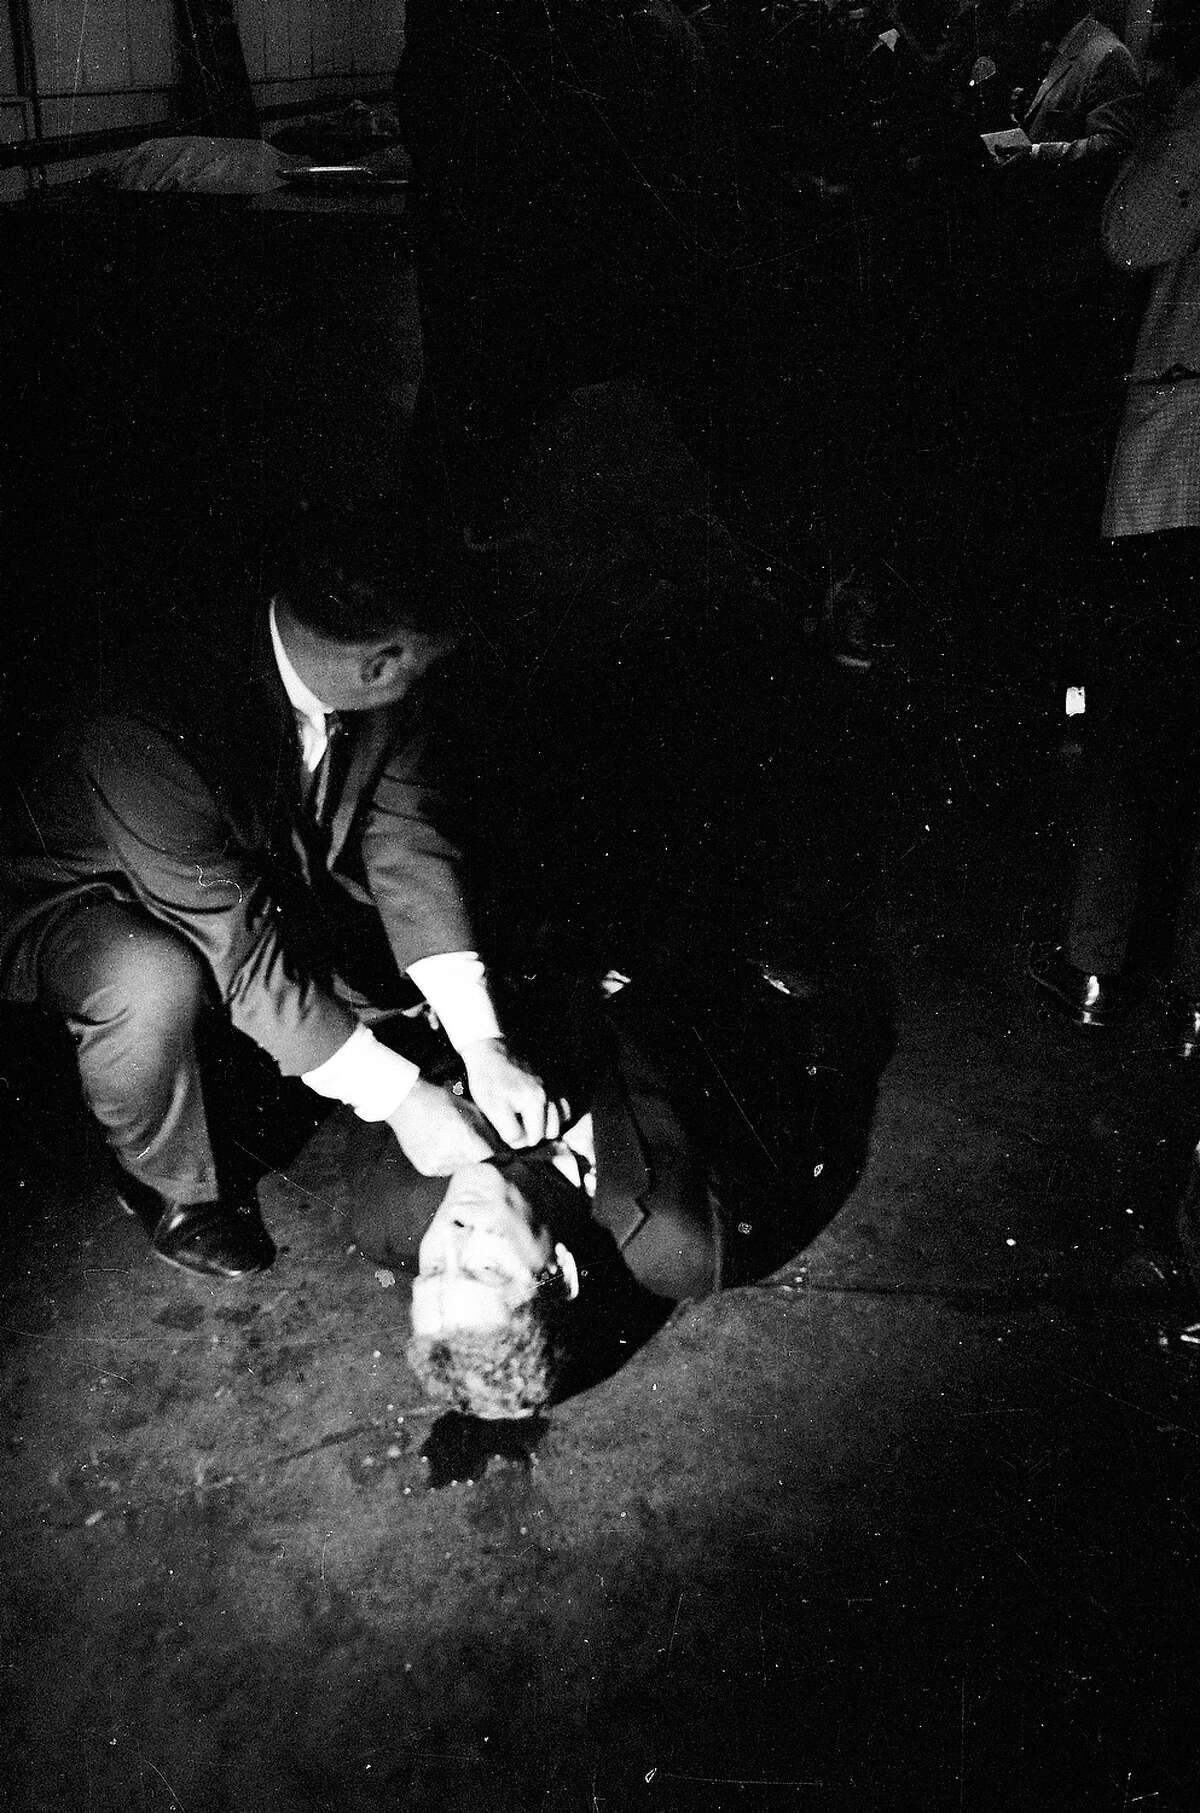 A man aids Senator Robert F. Kennedy who is laying on the kitchen floor of the Ambassador Hotel moments after being fatally shot by assassin Sirhan Sirhan.